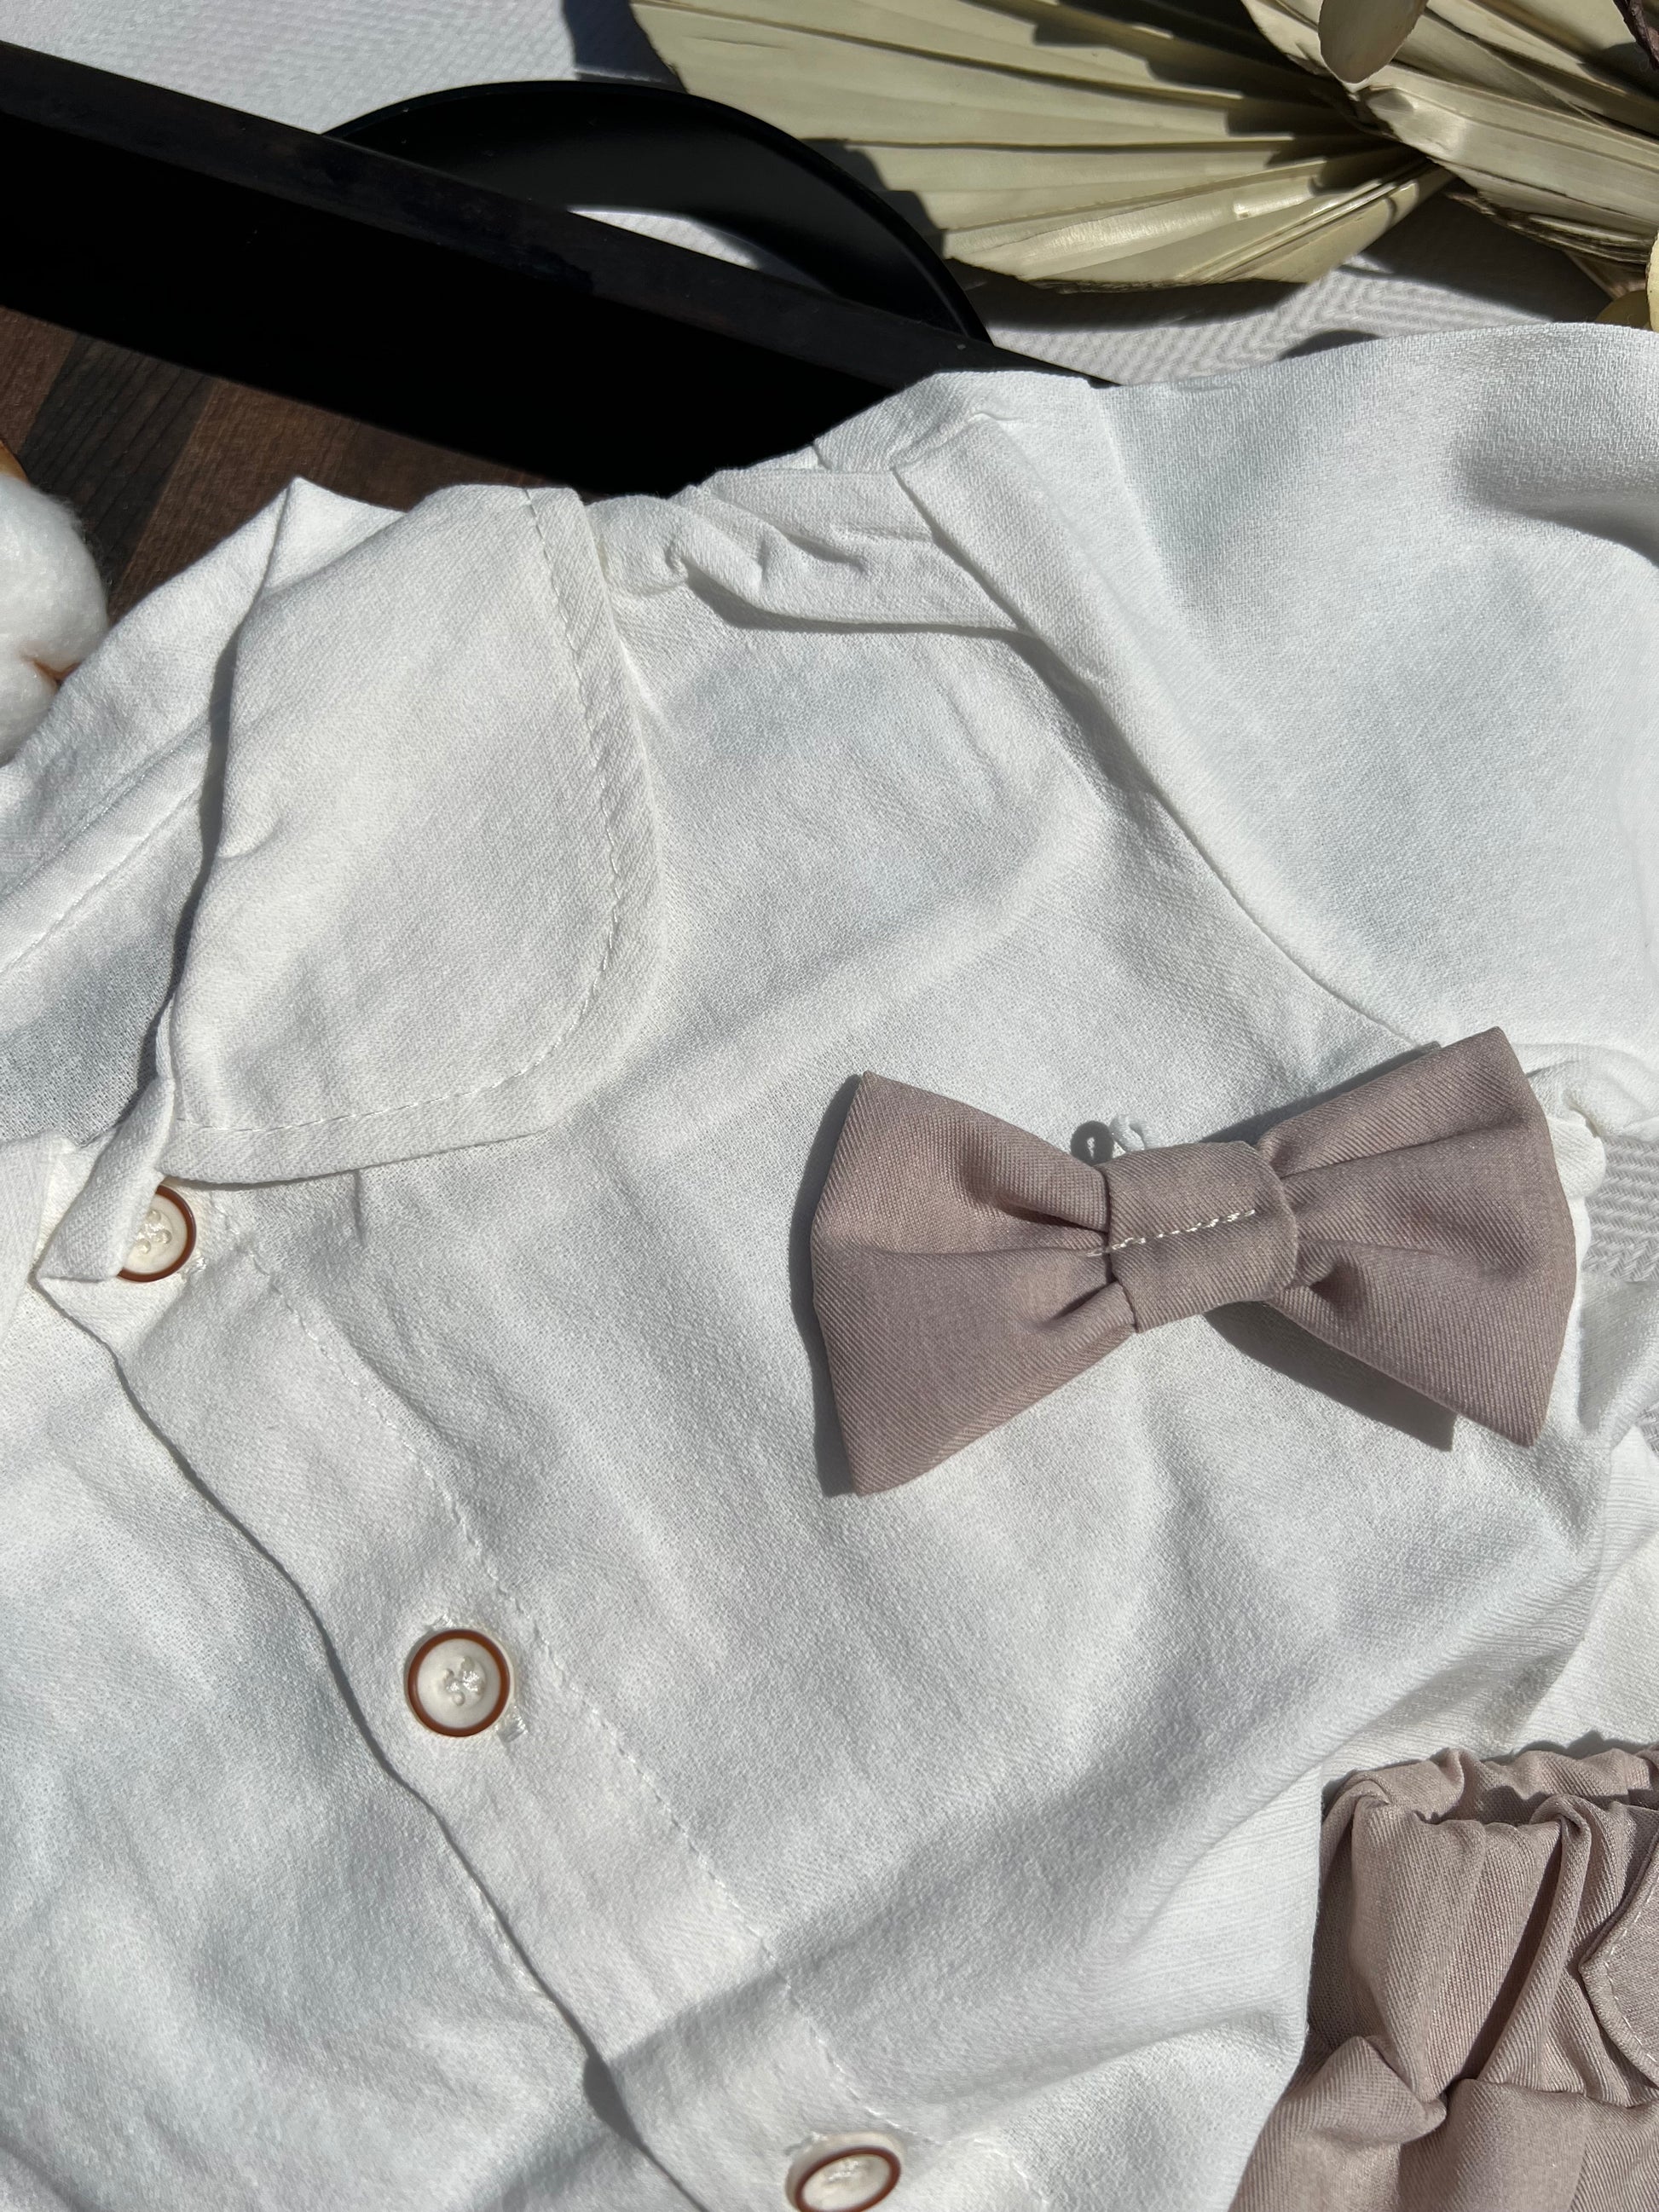 Formal Baby White Button-up Dress Shirt and Latte Colored Bow Tie